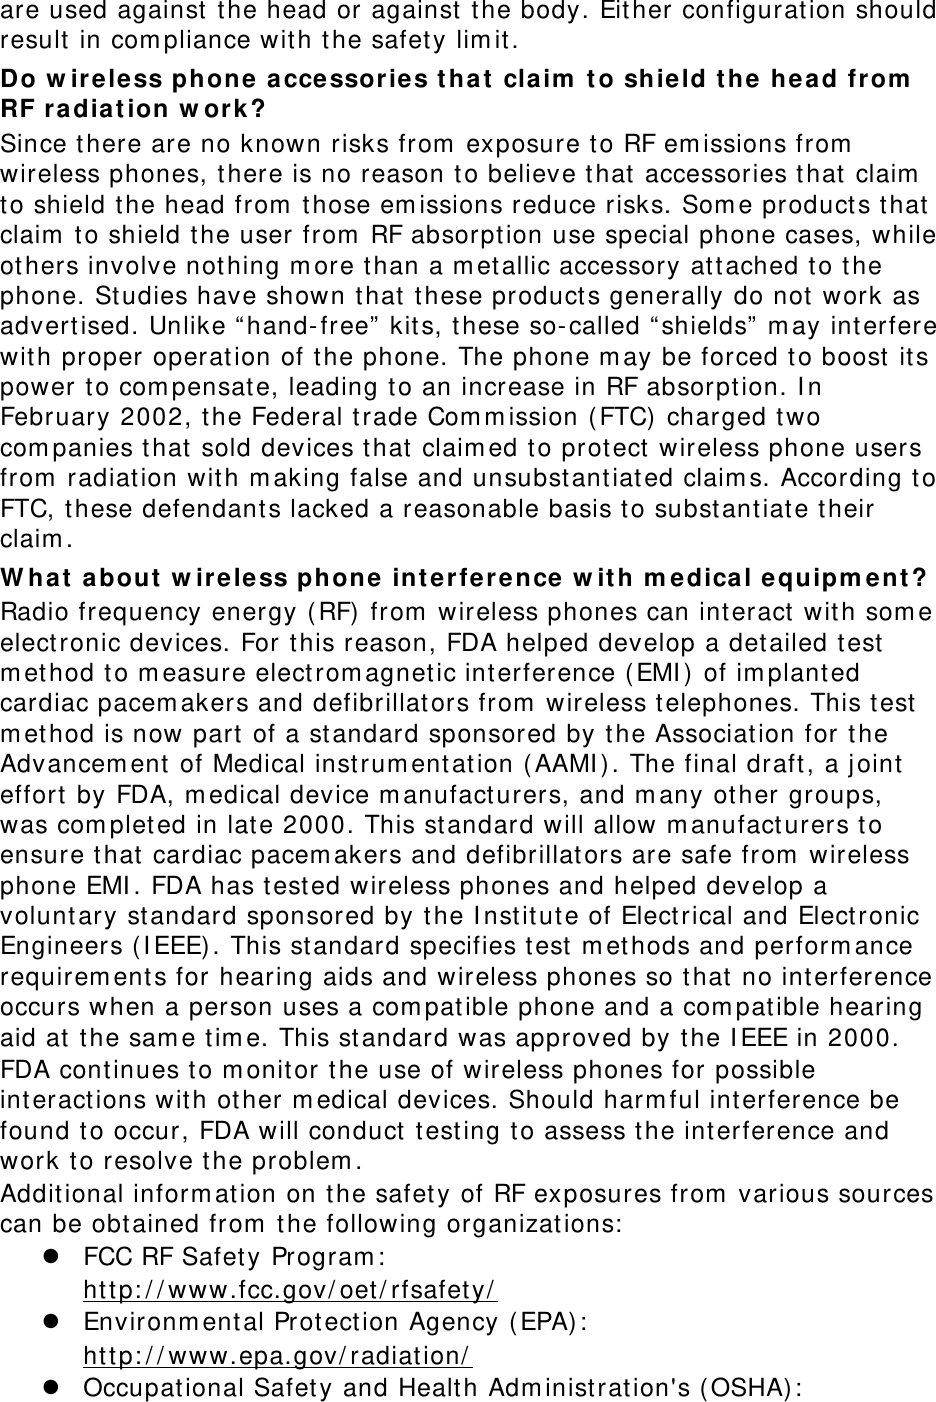 are used against  t he head or against  the body. Eit her configuration should result in com pliance wit h the safet y lim it . Do w irele ss ph one accessories t hat cla im  to shield t he head fr om  RF radia t ion w ork? Since there are no known risks from  exposure to RF em issions from  wireless phones, t here is no reason t o believe t hat accessories that  claim  to shield t he head from  t hose em issions reduce risks. Som e product s that claim  t o shield t he user from  RF absorpt ion use special phone cases, while others involve not hing m ore than a m etallic accessory attached to the phone. Studies have shown t hat these product s generally do not work as advert ised. Unlike “ hand- free”  kit s, these so- called “ shields”  m ay interfere with proper operation of t he phone. The phone m ay be forced t o boost  its power t o com pensat e, leading t o an increase in RF absorpt ion. I n February 2002, t he Federal t rade Com m ission ( FTC) charged t wo com panies t hat sold devices that claim ed t o protect wireless phone users from  radiat ion wit h m aking false and unsubstant iat ed claim s. According t o FTC, these defendant s lacked a reasonable basis t o subst antiate t heir claim . W ha t about w ire less phone  int e rfe rence w it h m edica l equipm ent? Radio frequency energy ( RF)  from  wireless phones can int eract  wit h som e elect ronic devices. For t his reason, FDA helped develop a detailed test m ethod t o m easure elect rom agnet ic interference ( EMI )  of im plant ed cardiac pacem akers and defibrillat ors from  wireless t elephones. This t est m ethod is now part of a standard sponsored by t he Association for t he Advancem ent of Medical instrum ent ation ( AAMI ) . The final draft , a j oint effort  by FDA, m edical device m anufact urers, and m any ot her groups, was com pleted in lat e 2000. This standard will allow m anufact urers t o ensure t hat cardiac pacem akers and defibrillat ors are safe from  wireless phone EMI . FDA has t est ed wireless phones and helped develop a voluntary standard sponsored by t he I nstit ut e of Electrical and Elect ronic Engineers ( I EEE) . This standard specifies t est m ethods and perform ance requirem ents for hearing aids and wireless phones so t hat  no int erference occurs when a person uses a com patible phone and a com patible hearing aid at t he sam e tim e. This standard was approved by the I EEE in 2000. FDA continues t o m onit or t he use of wireless phones for possible interact ions wit h ot her m edical devices. Should harm ful interference be found t o occur, FDA will conduct testing t o assess t he int erference and work to resolve the problem . Additional inform at ion on t he safety of RF exposures from  various sources can be obtained from  t he following organizat ions:   FCC RF Safet y Program :   http: / / www.fcc.gov/ oet/ rfsafet y/   Environm ent al Prot ection Agency (EPA) :   http: / / www.epa.gov/ radiat ion/   Occupational Safet y and Health Adm inist ration&apos;s ( OSHA) :    